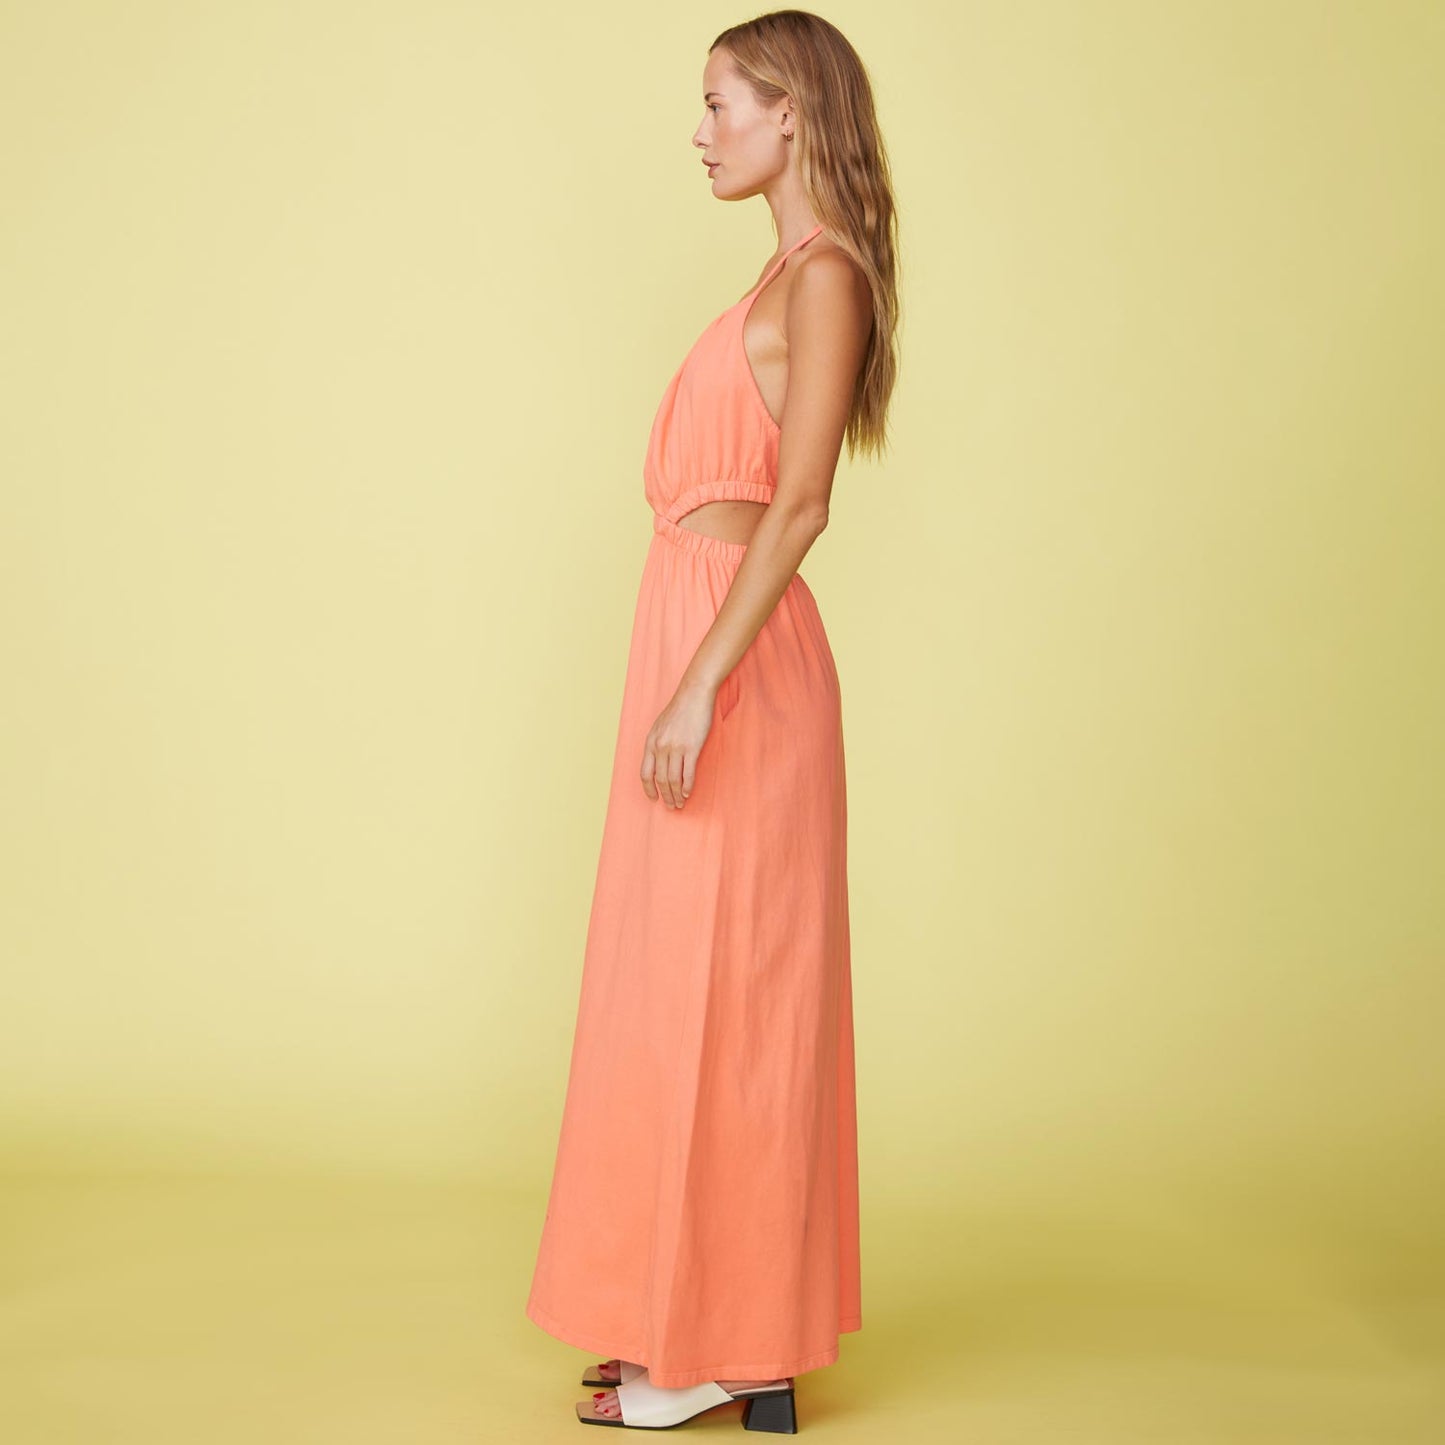 Side View of model wearing the Cut Out Halter Dress in Georgia Peach.